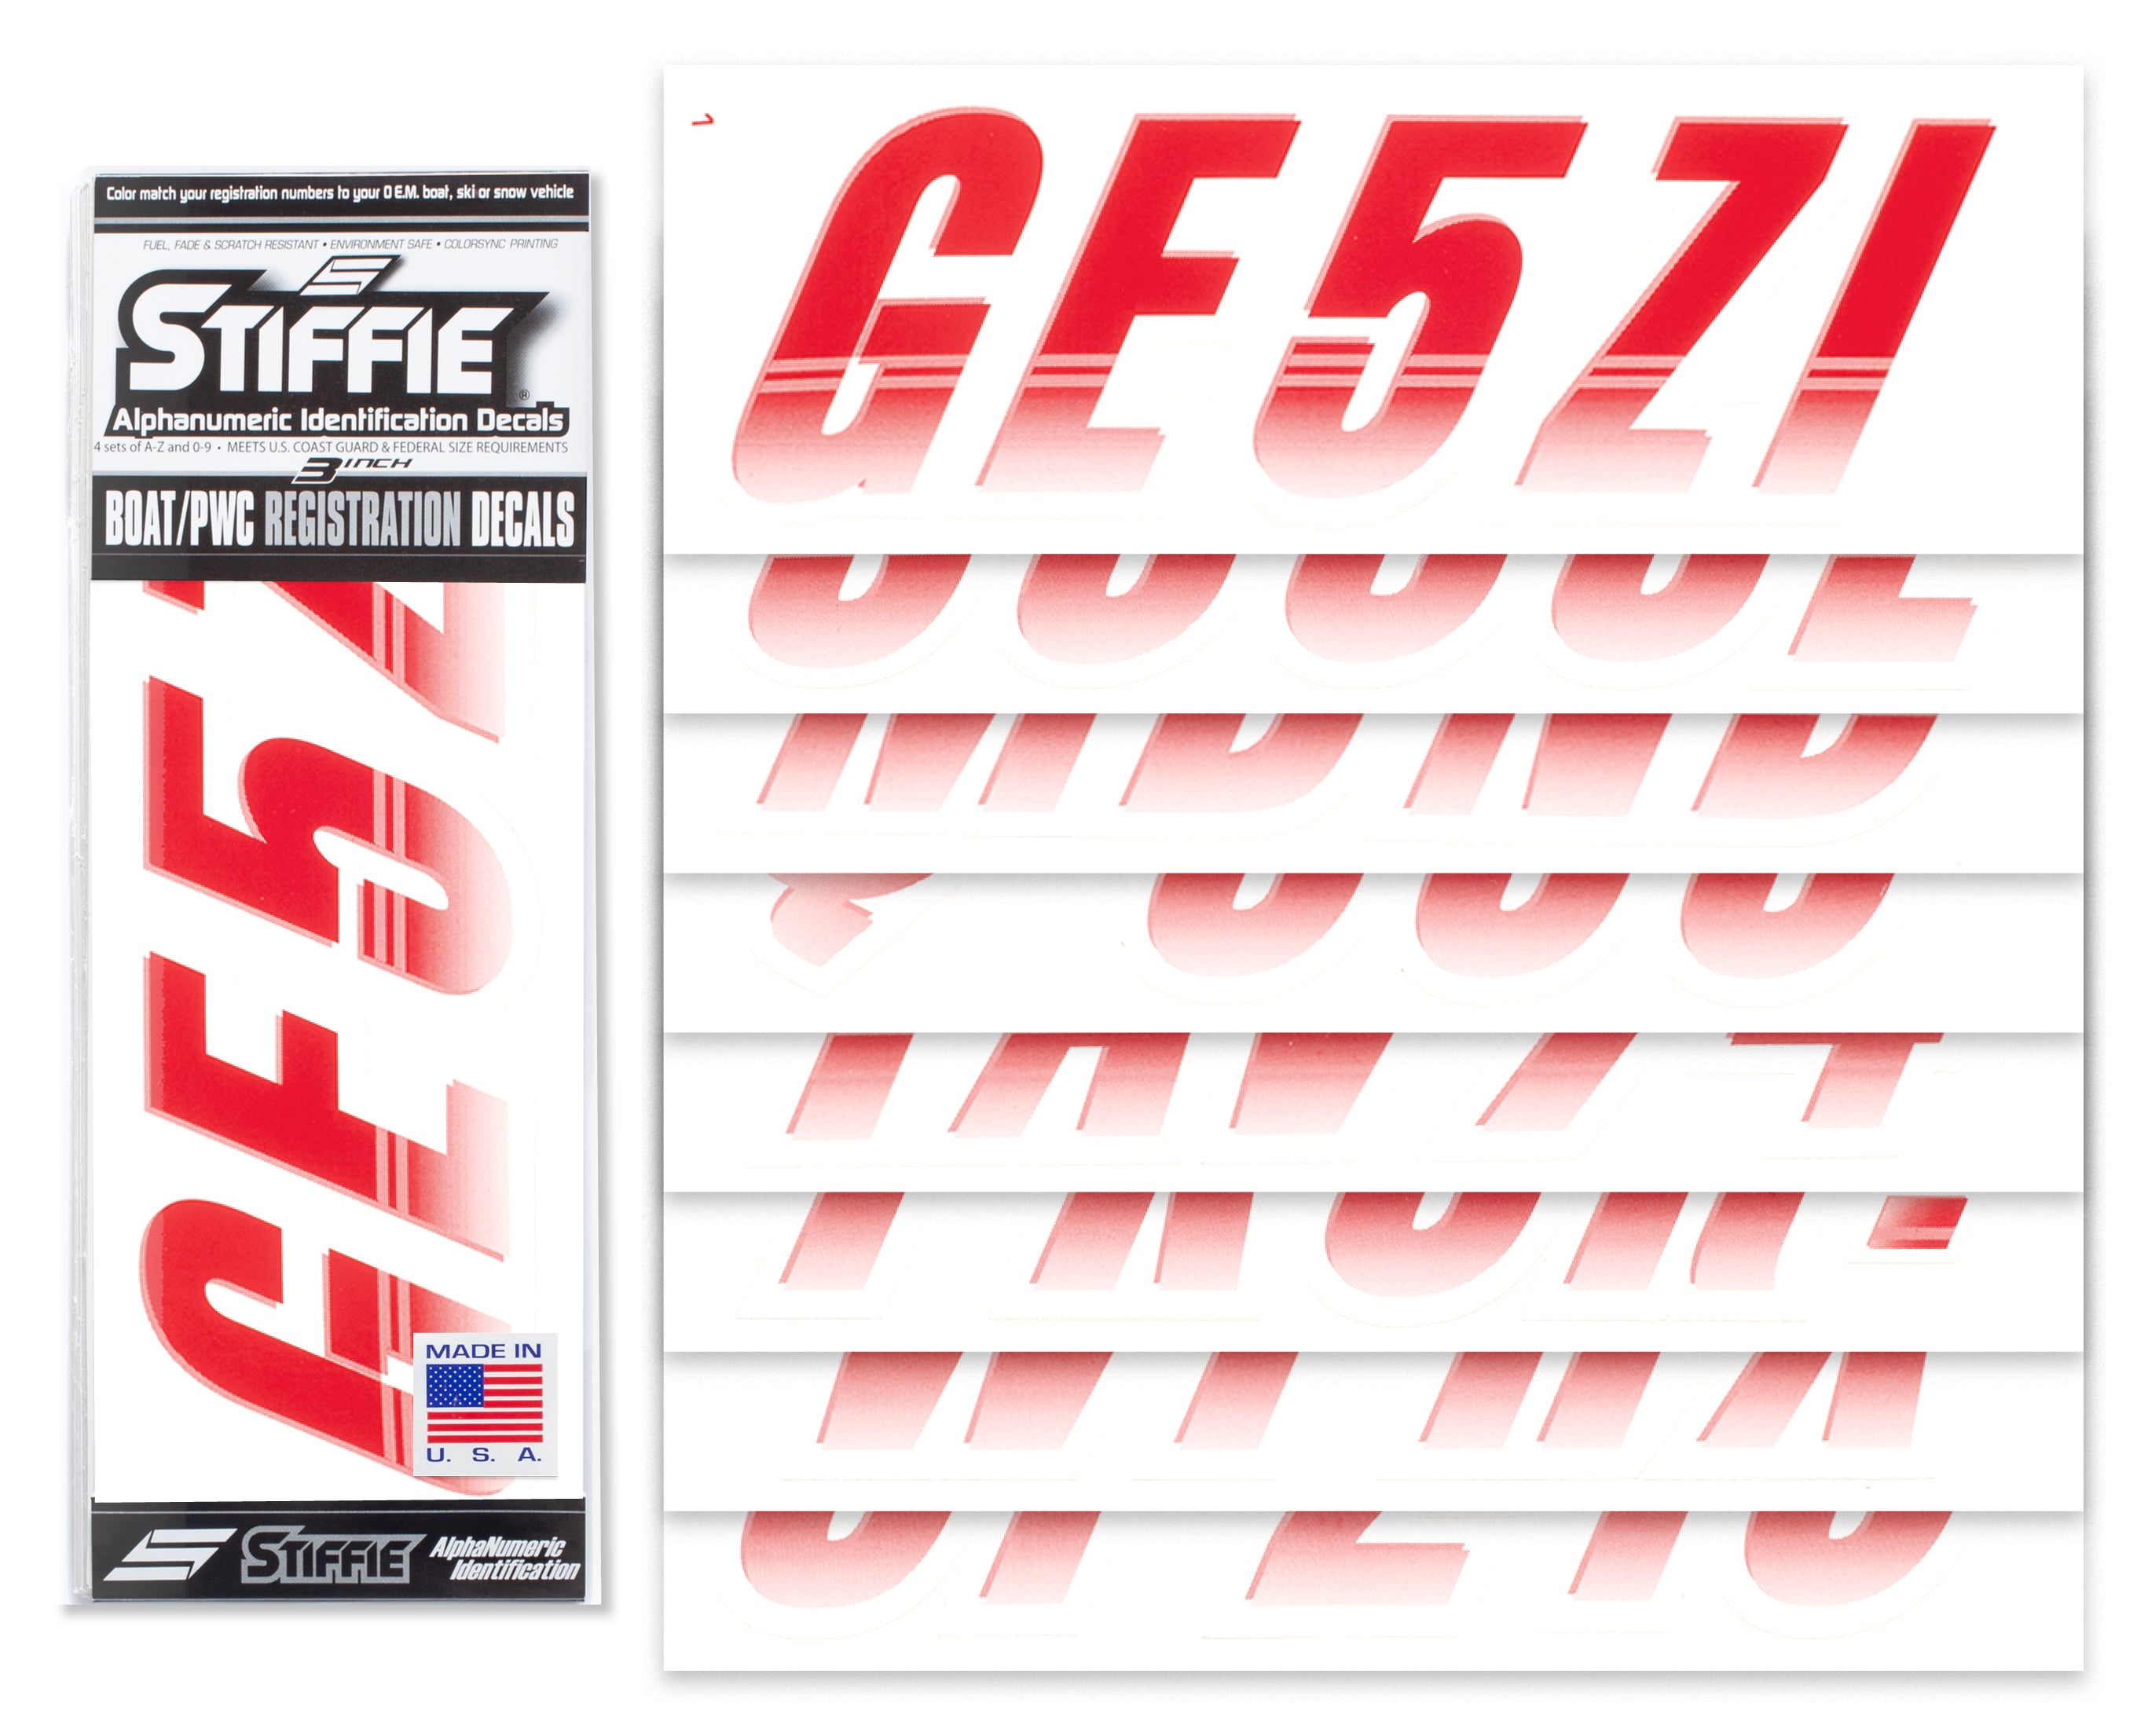 Stiffie Techtron Red/White 3" Alpha-Numeric Registration Identification Numbers Stickers Decals for Boats & Personal Watercraft